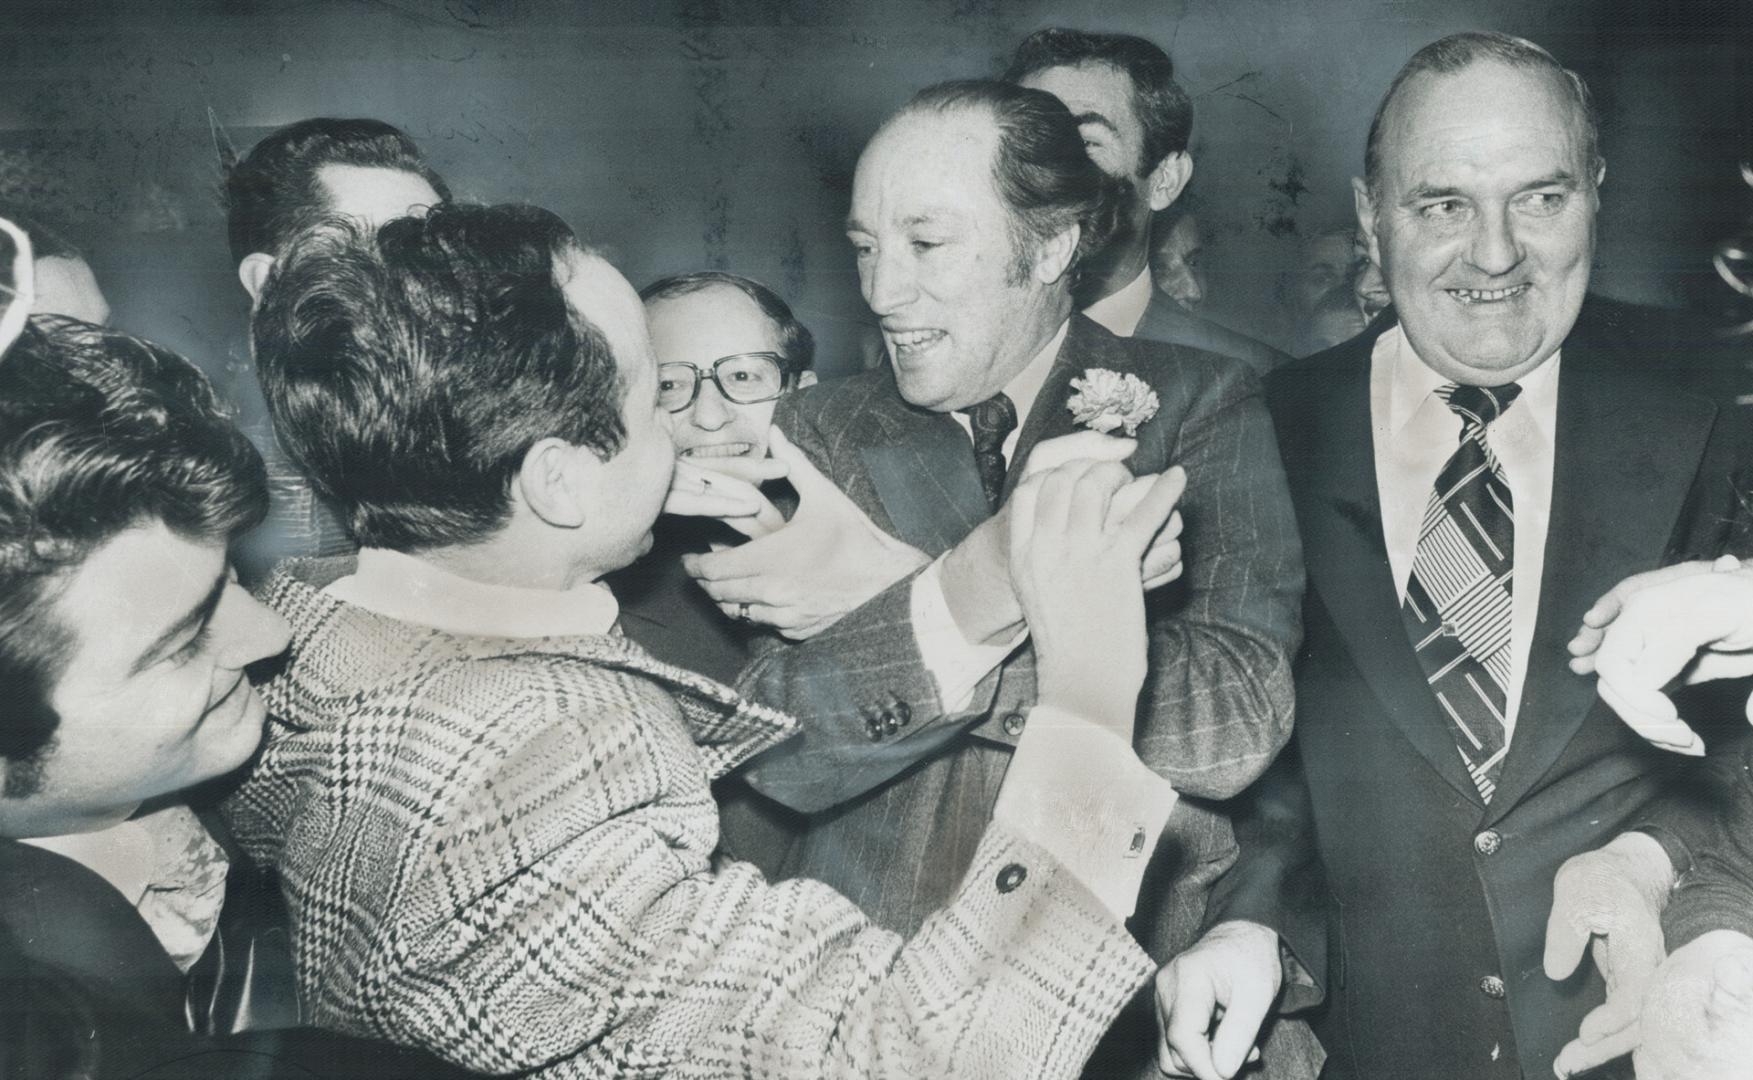 Prime Minister Pierre Trudeau receives greetings from well wishers after officially opening new Hall of Federation of Italian Canadian Associations on(...)